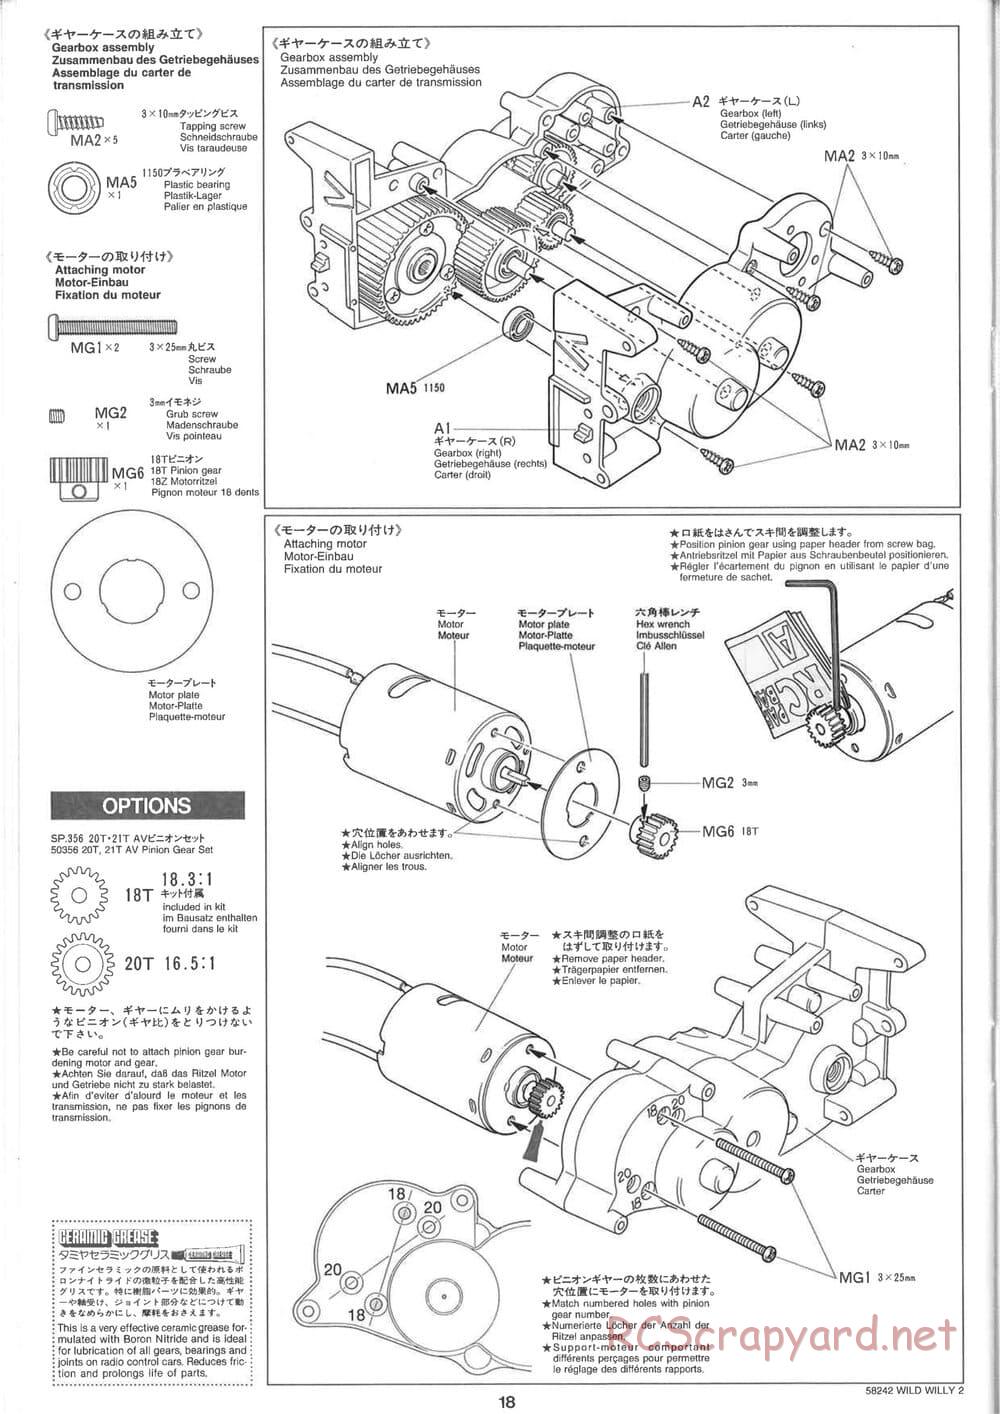 Tamiya - Wild Willy 2 - WR-02 Chassis - Manual - Page 18